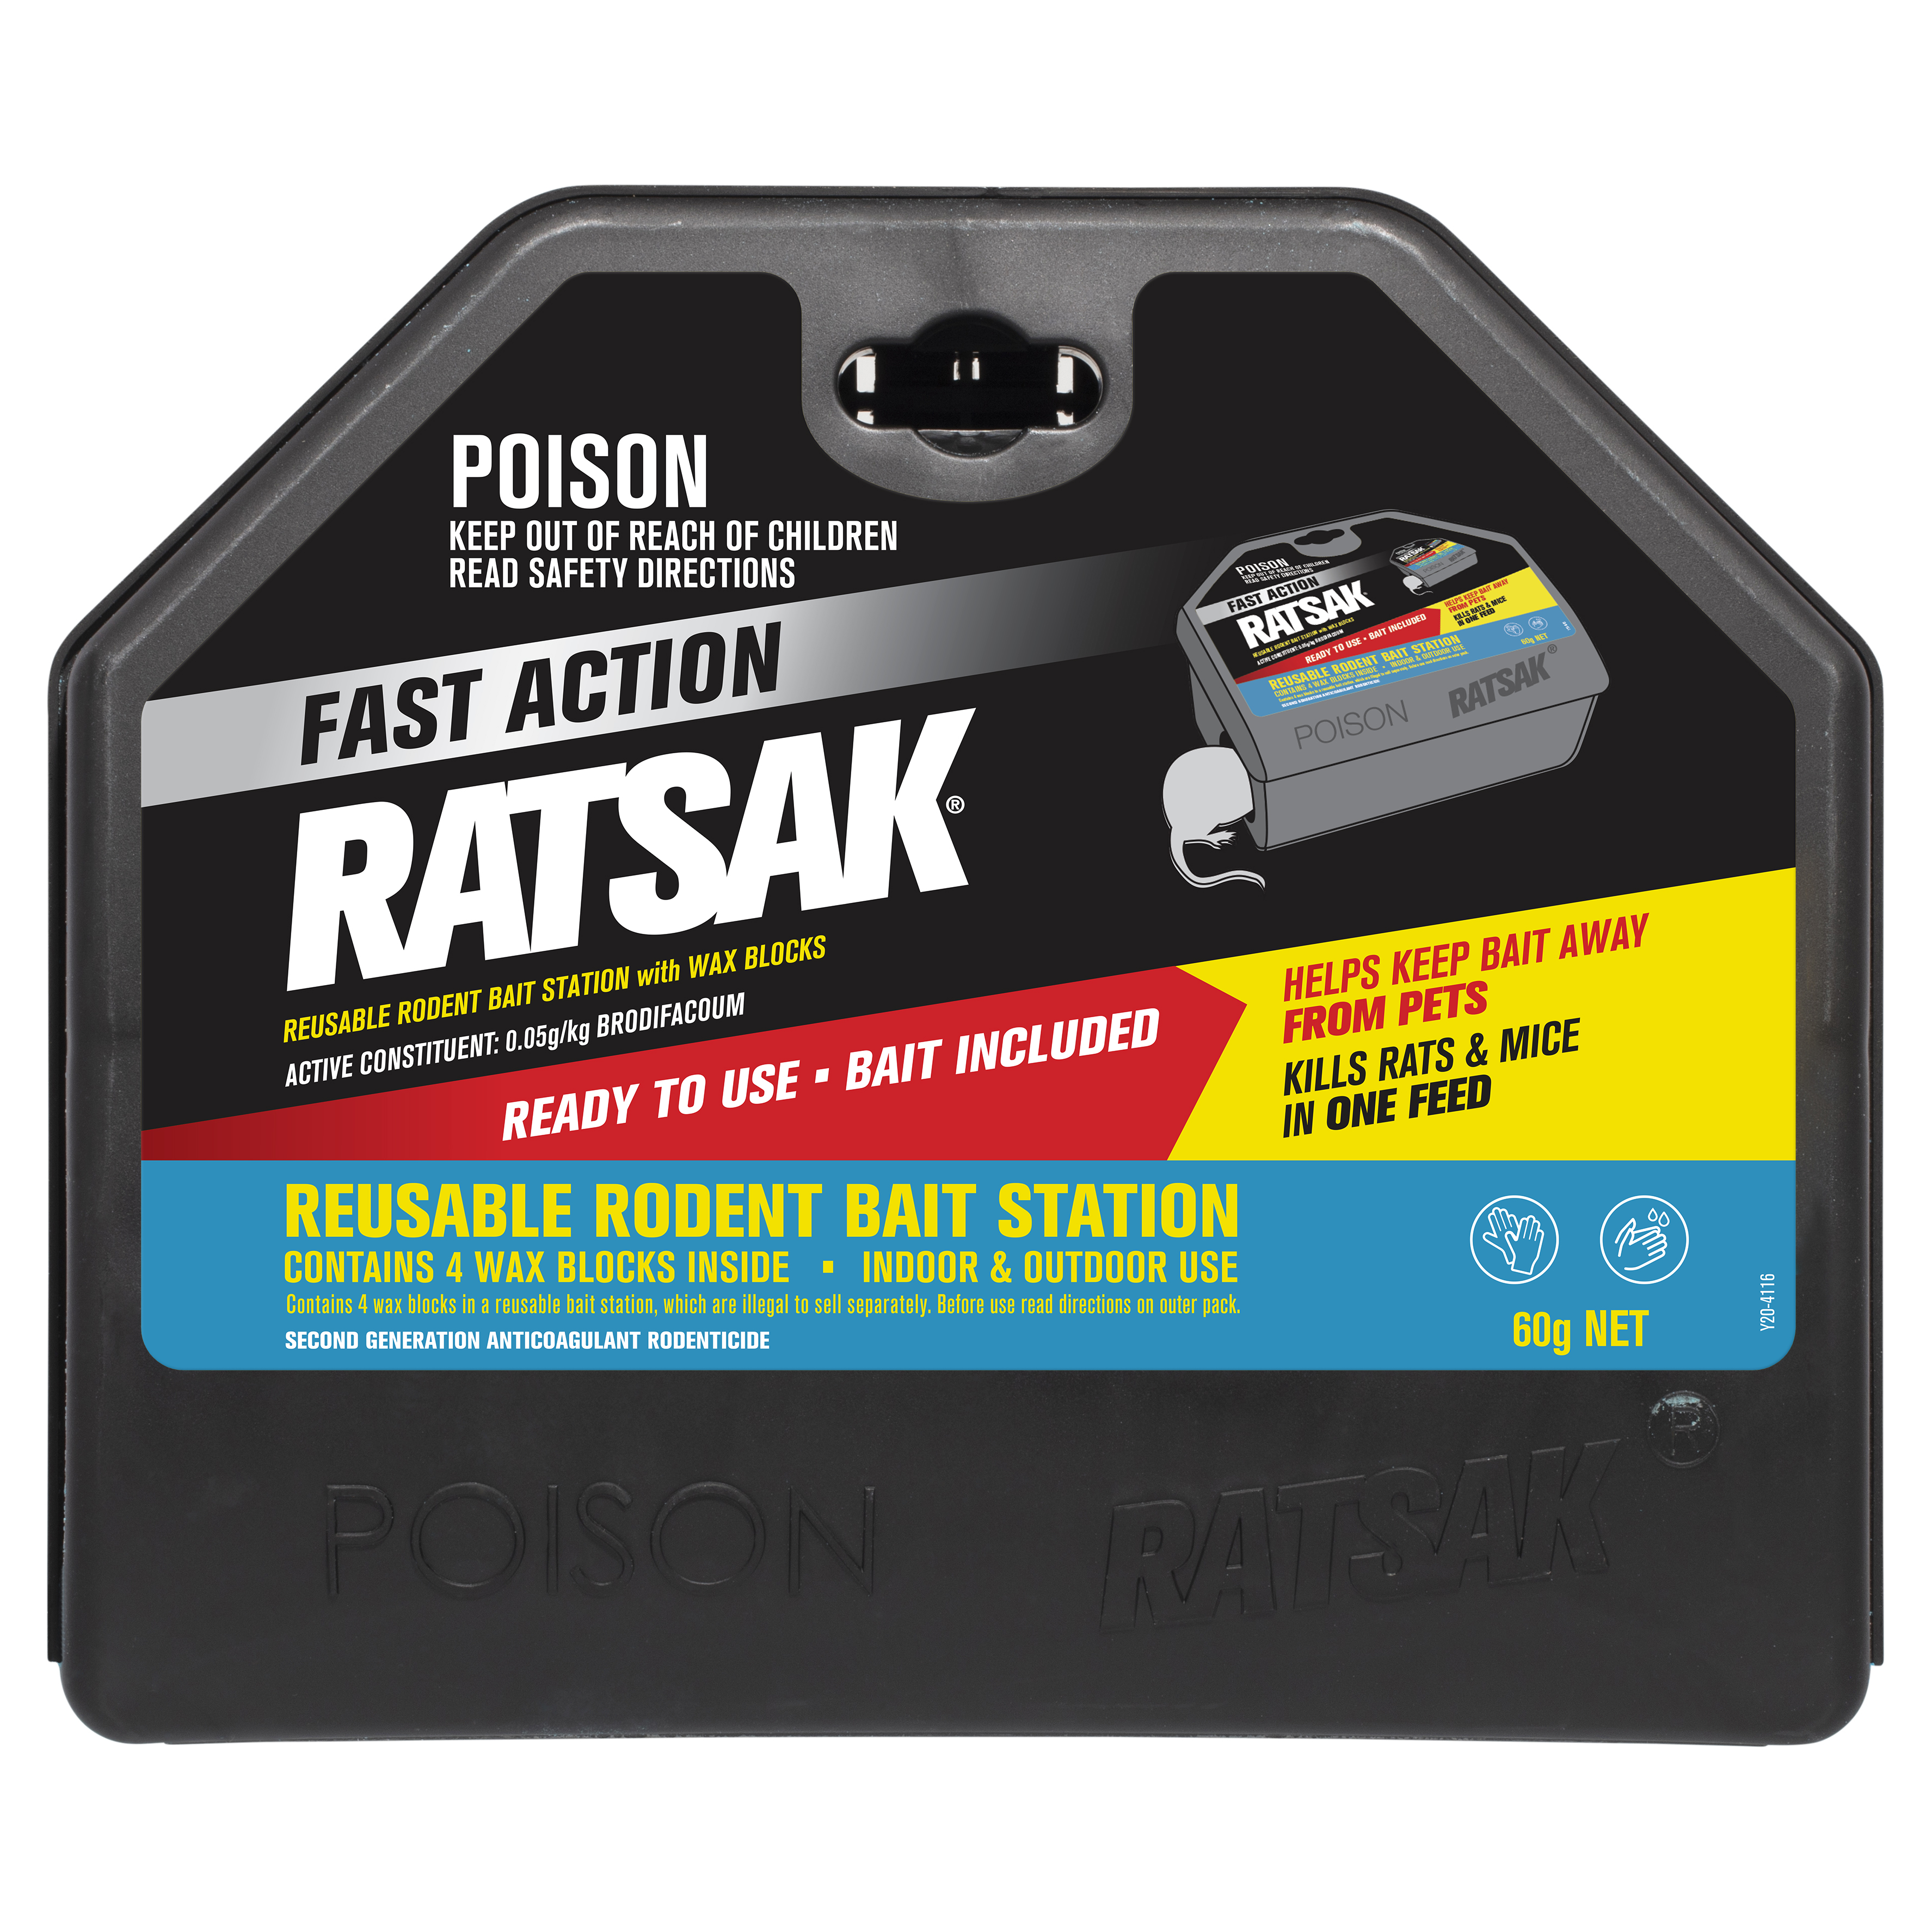 All About Rodent Bait Stations